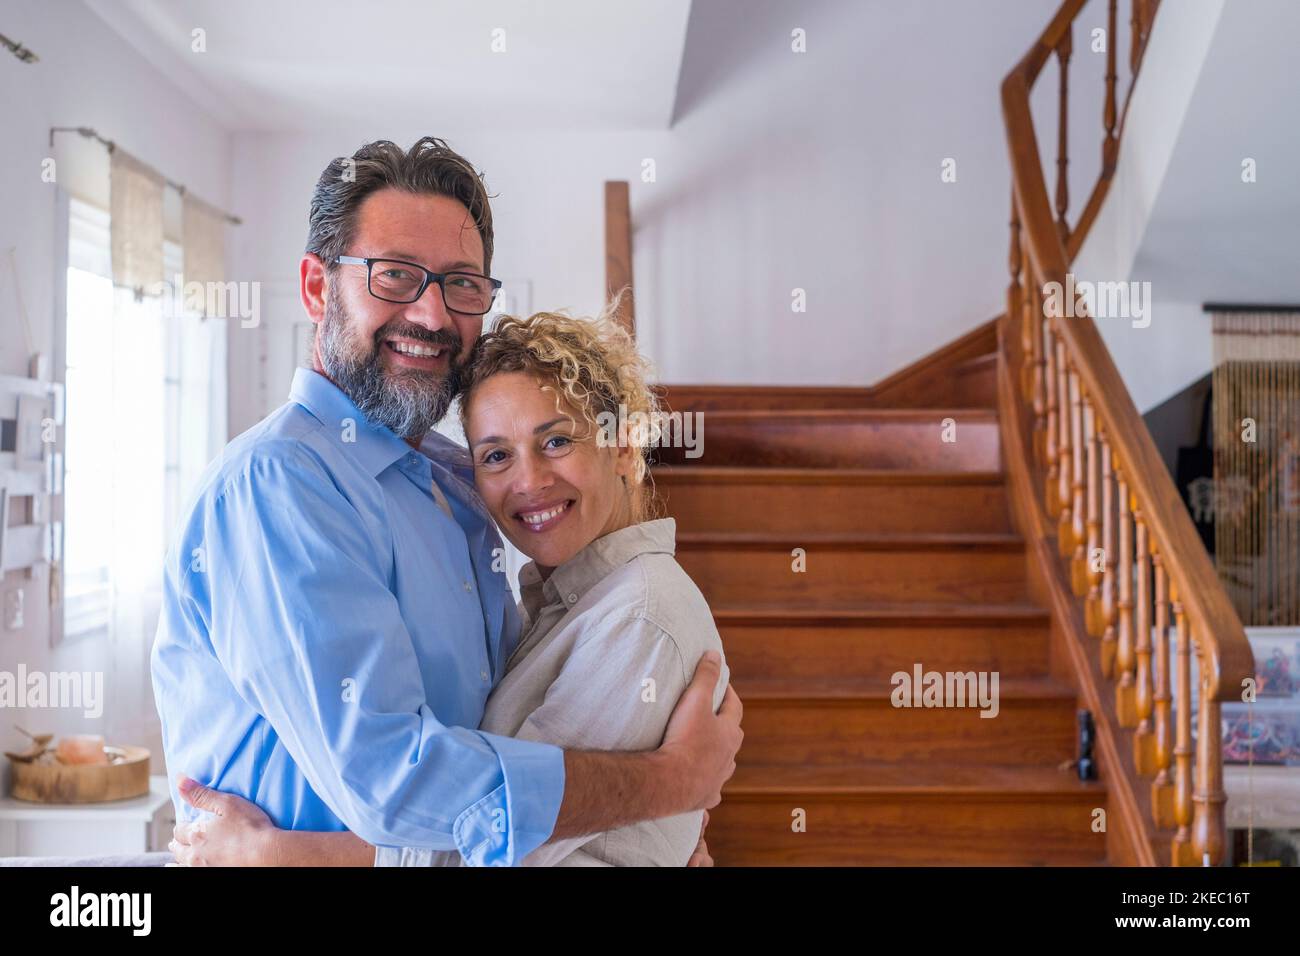 Happy caucasian couple embracing each other in the living room. Loving husband and wife hugging at home. Profile of affectionate man and woman spending leisure time together at modern house Stock Photo